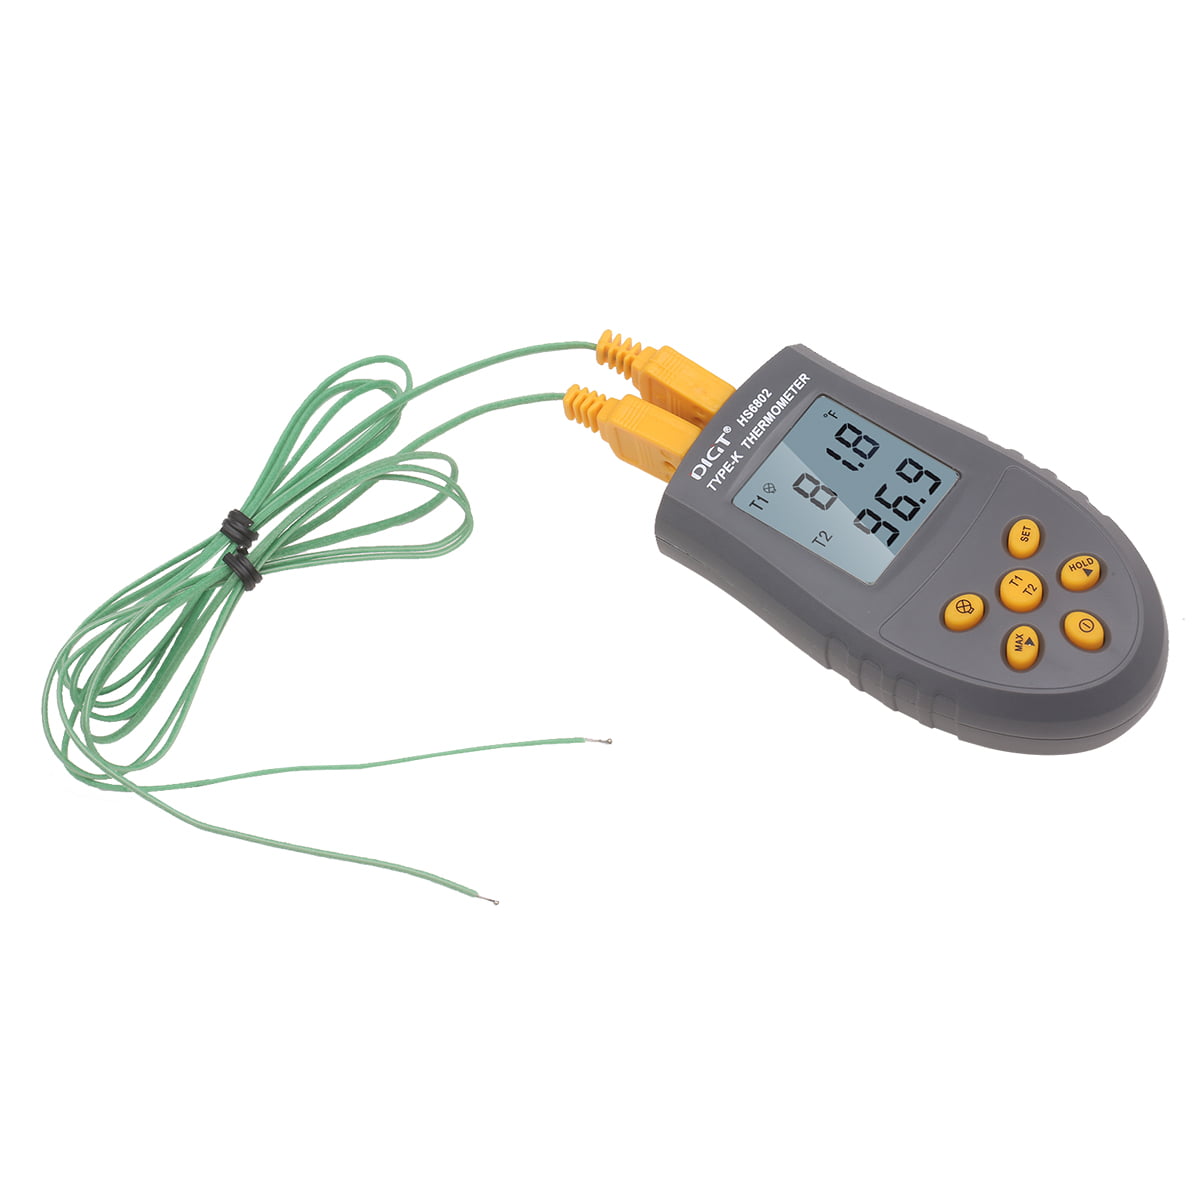 Portable High-precision Digital Thermometer Single Dual Channel Measurement LCD